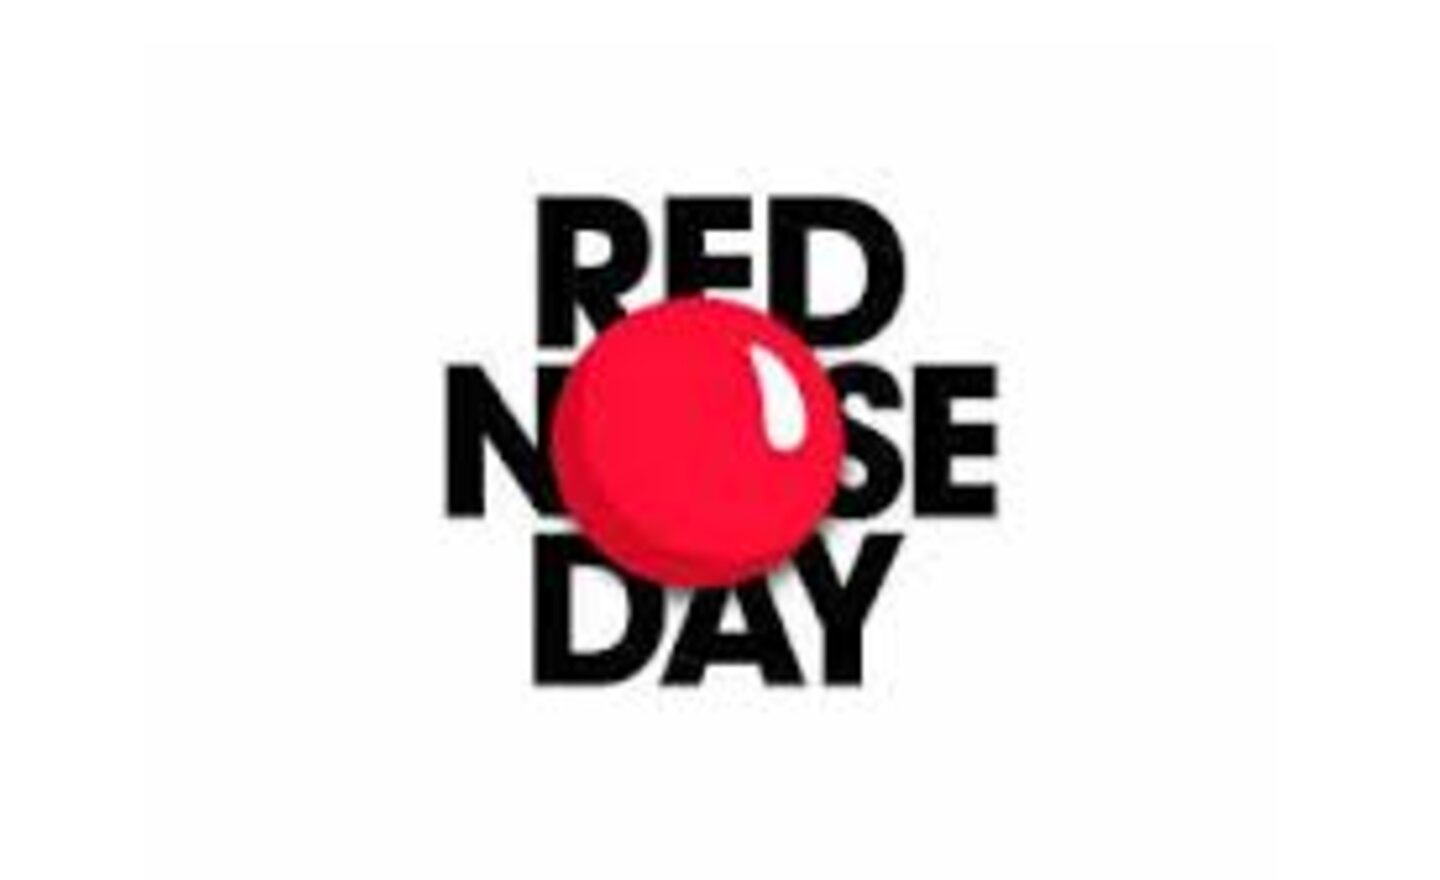 Image of Red nose day fun!